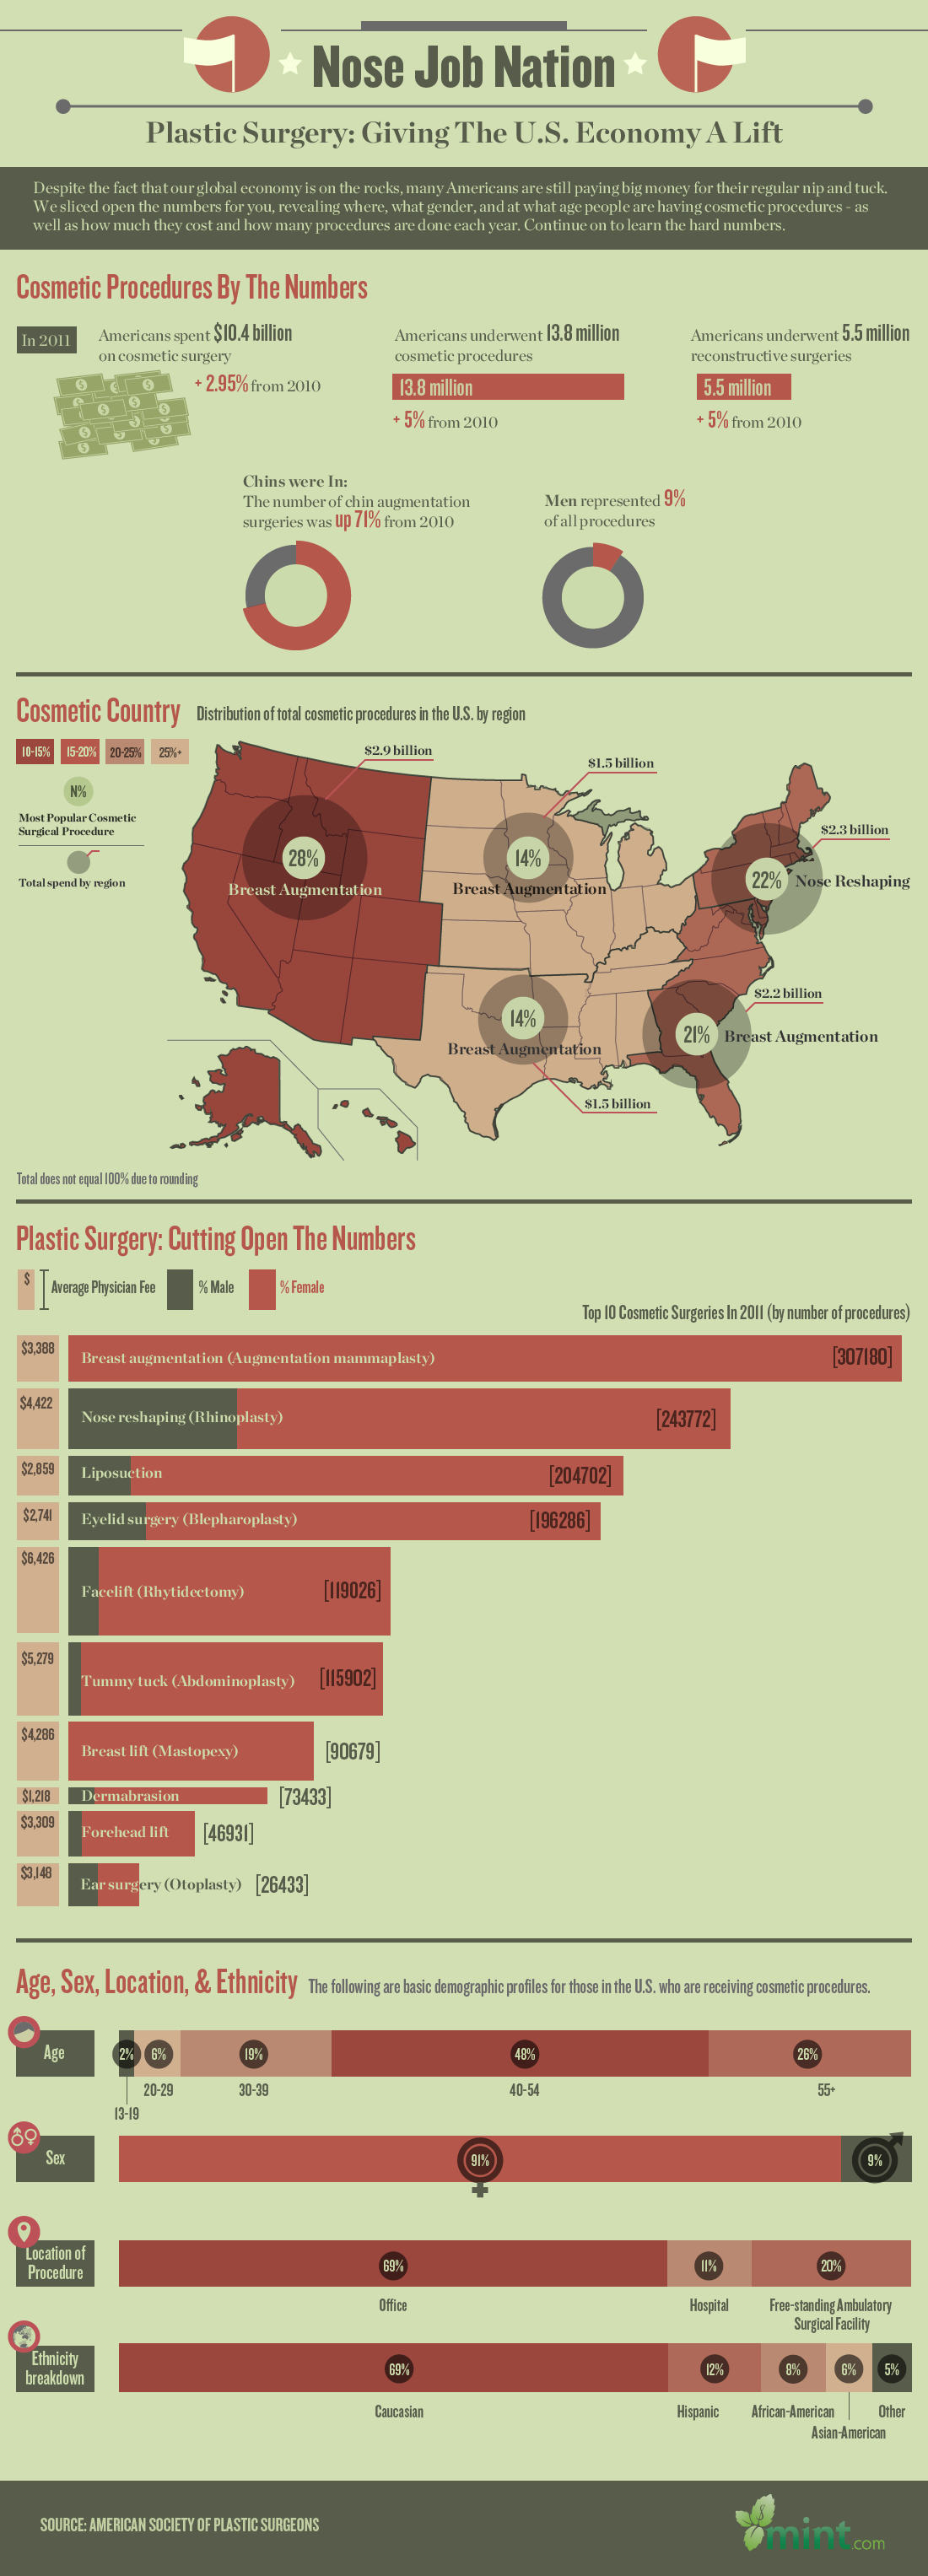 Infographic: Plastic Surgery is Giving the U.S. an Economic Lift ...